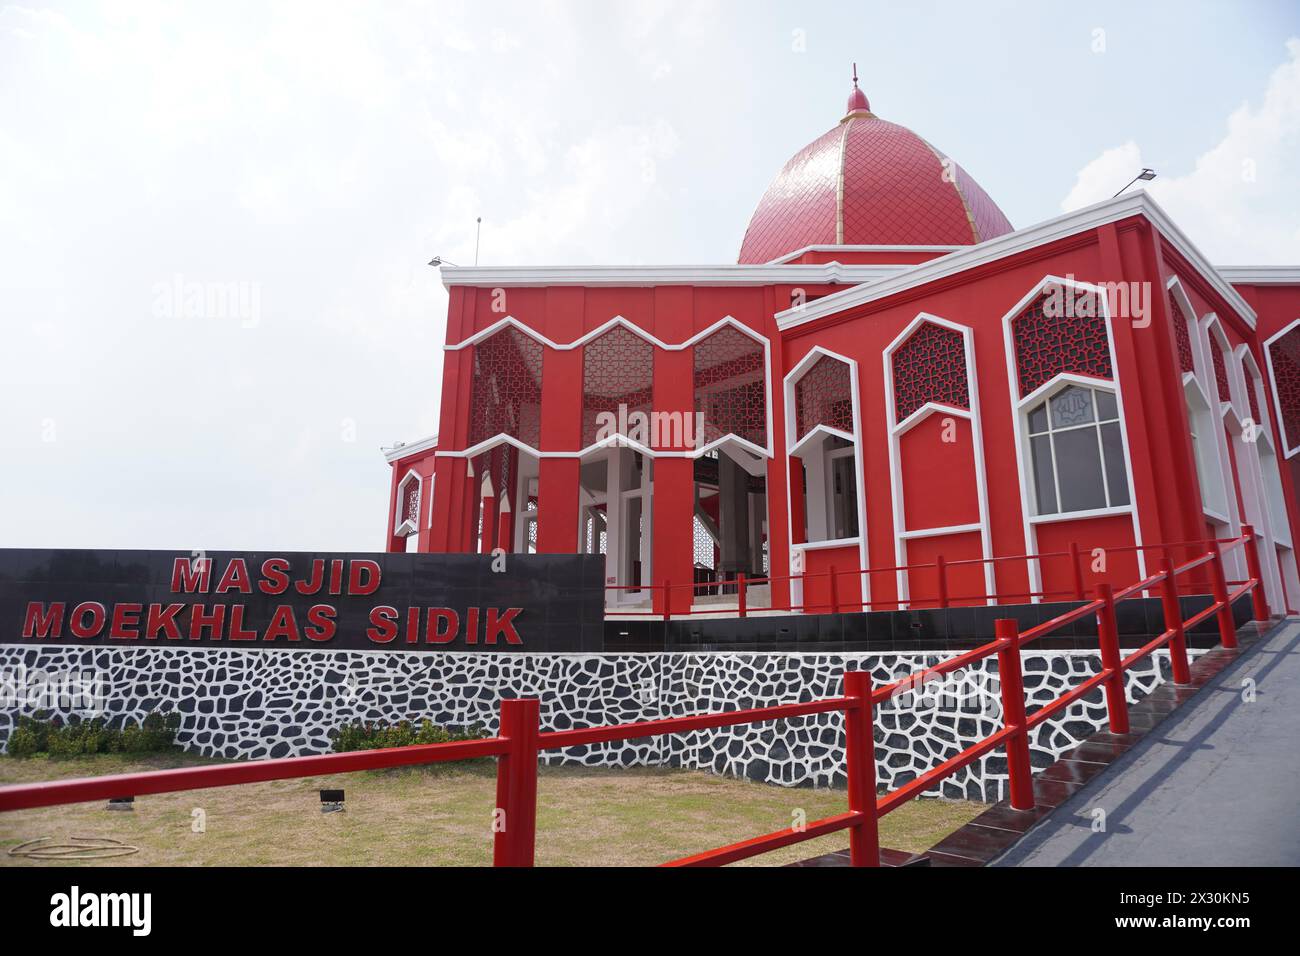 The Moekhlas Sidik Mosque is often referred to as the red mosque in Pandaan, Indonesia Stock Photo